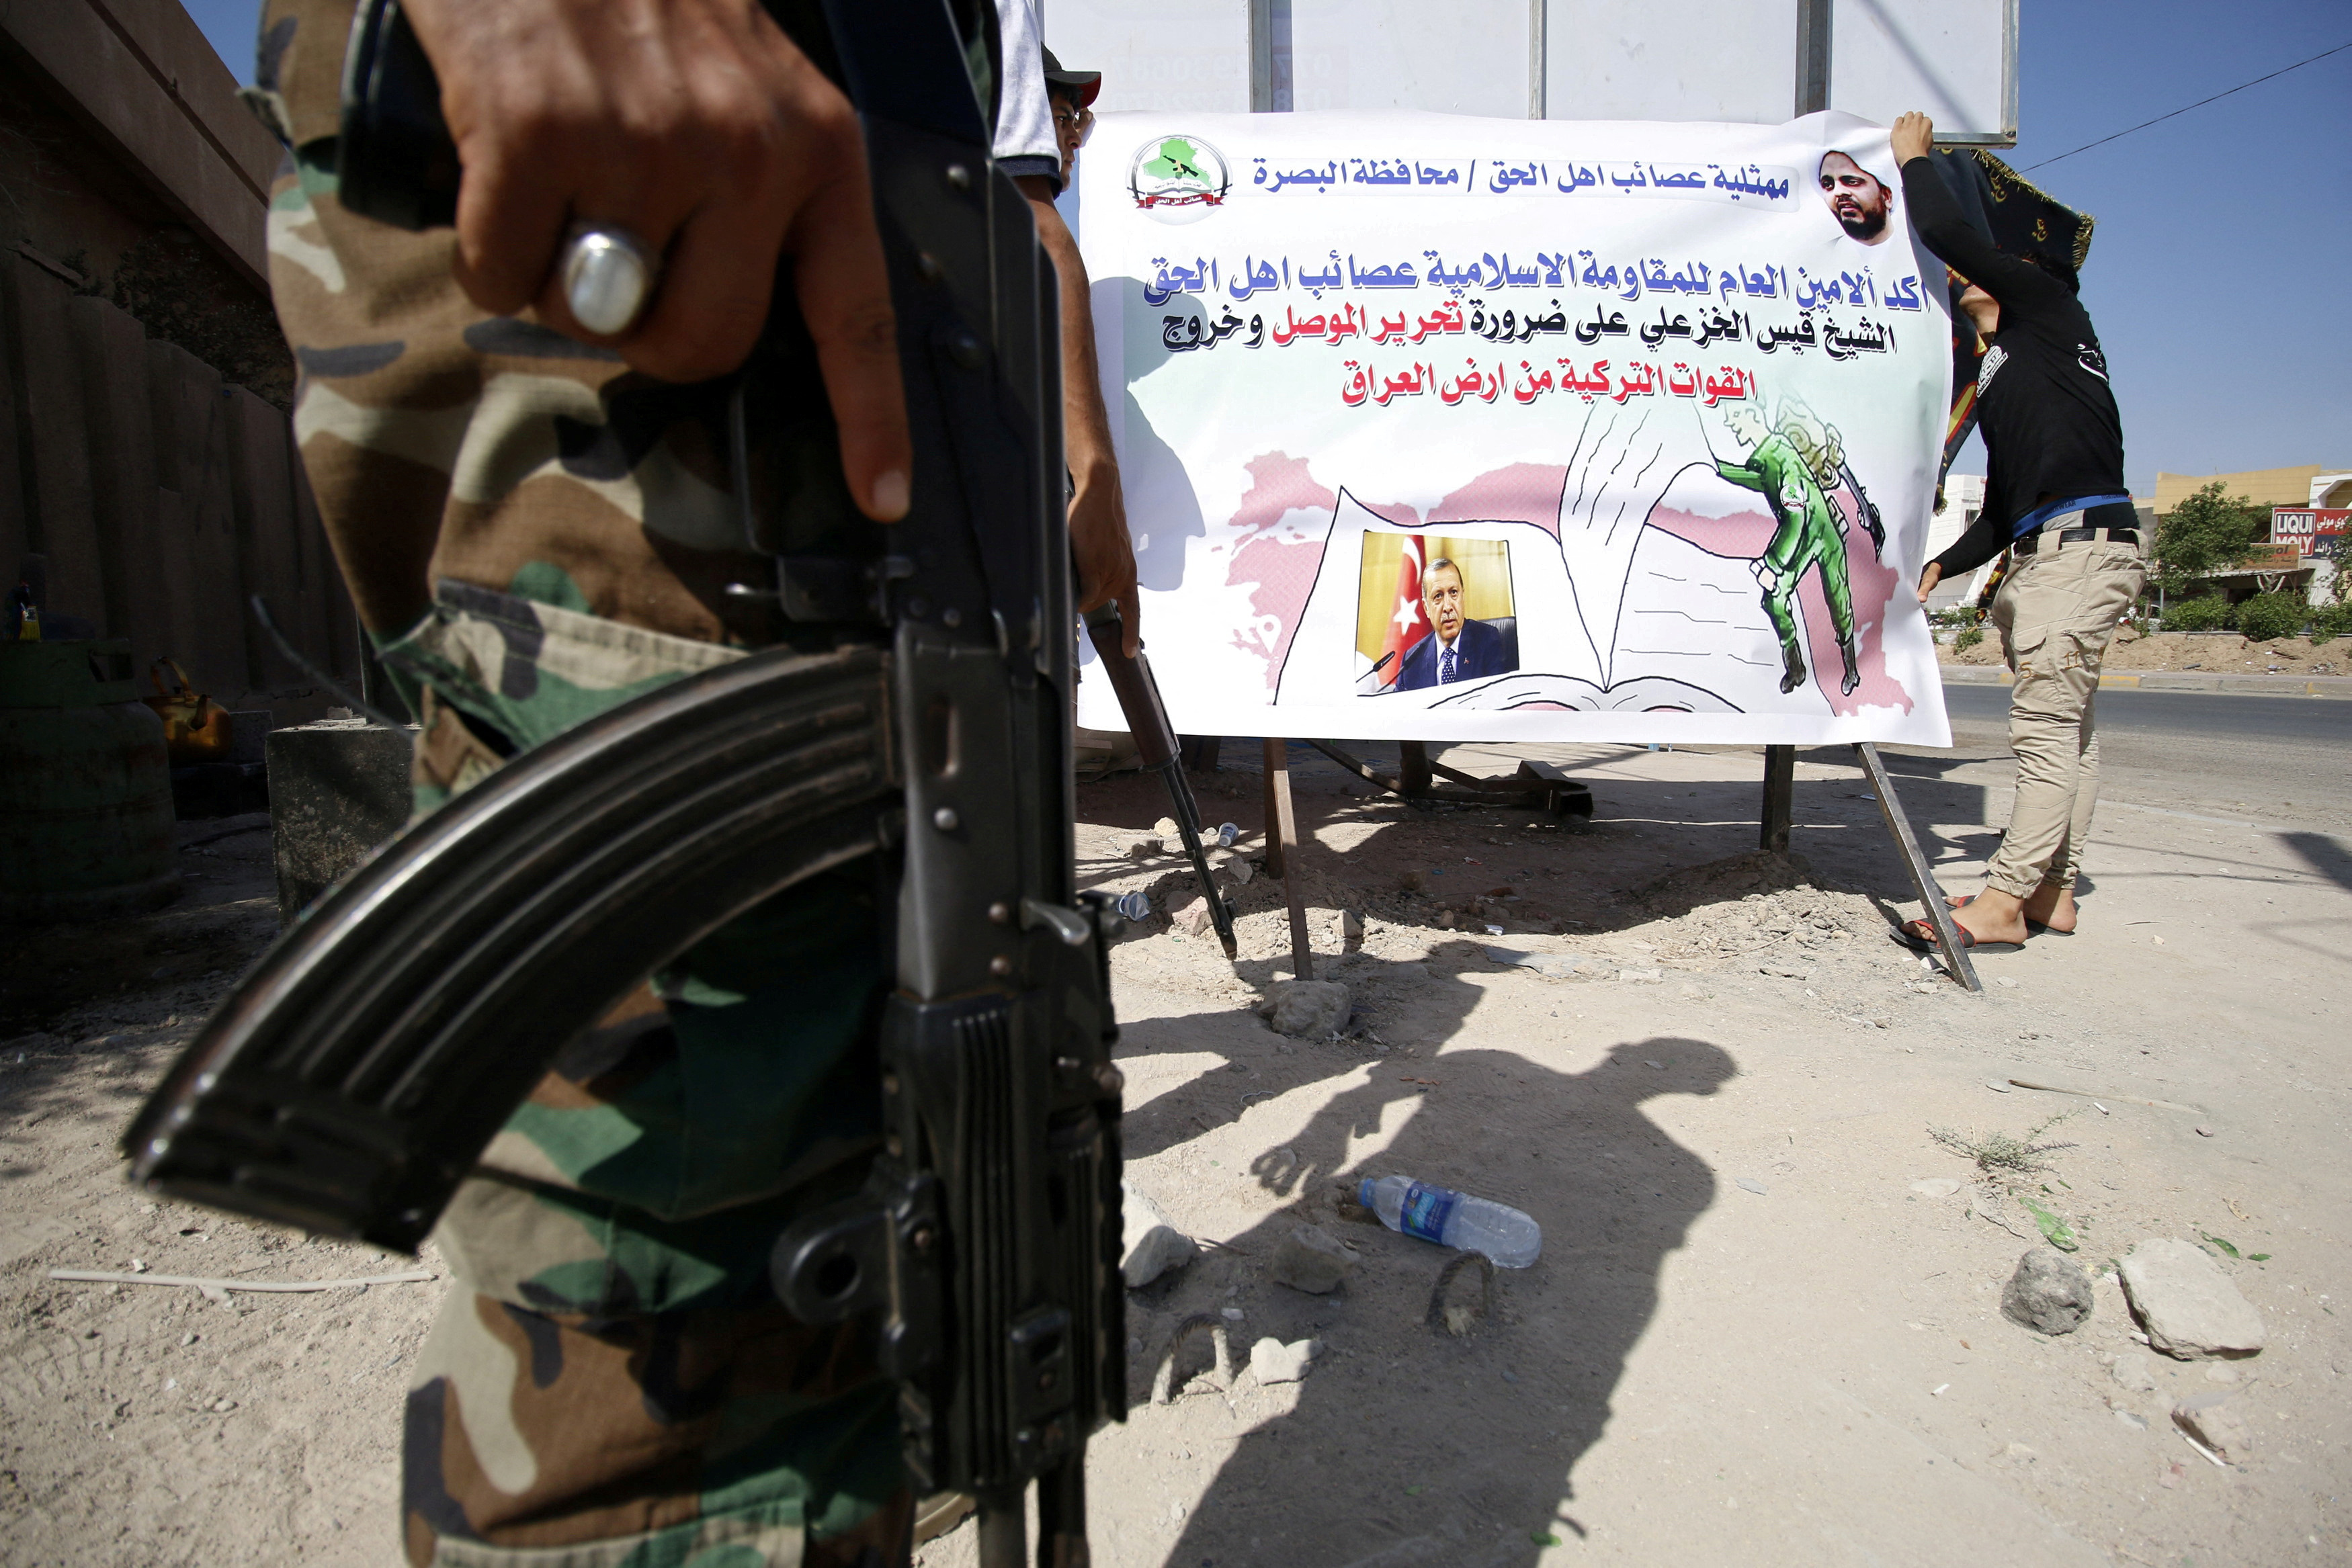 Members of Shi'ite group Asaib Ahl al-Haq put banners in the street against Turkey's military presence in Iraq, in Basra